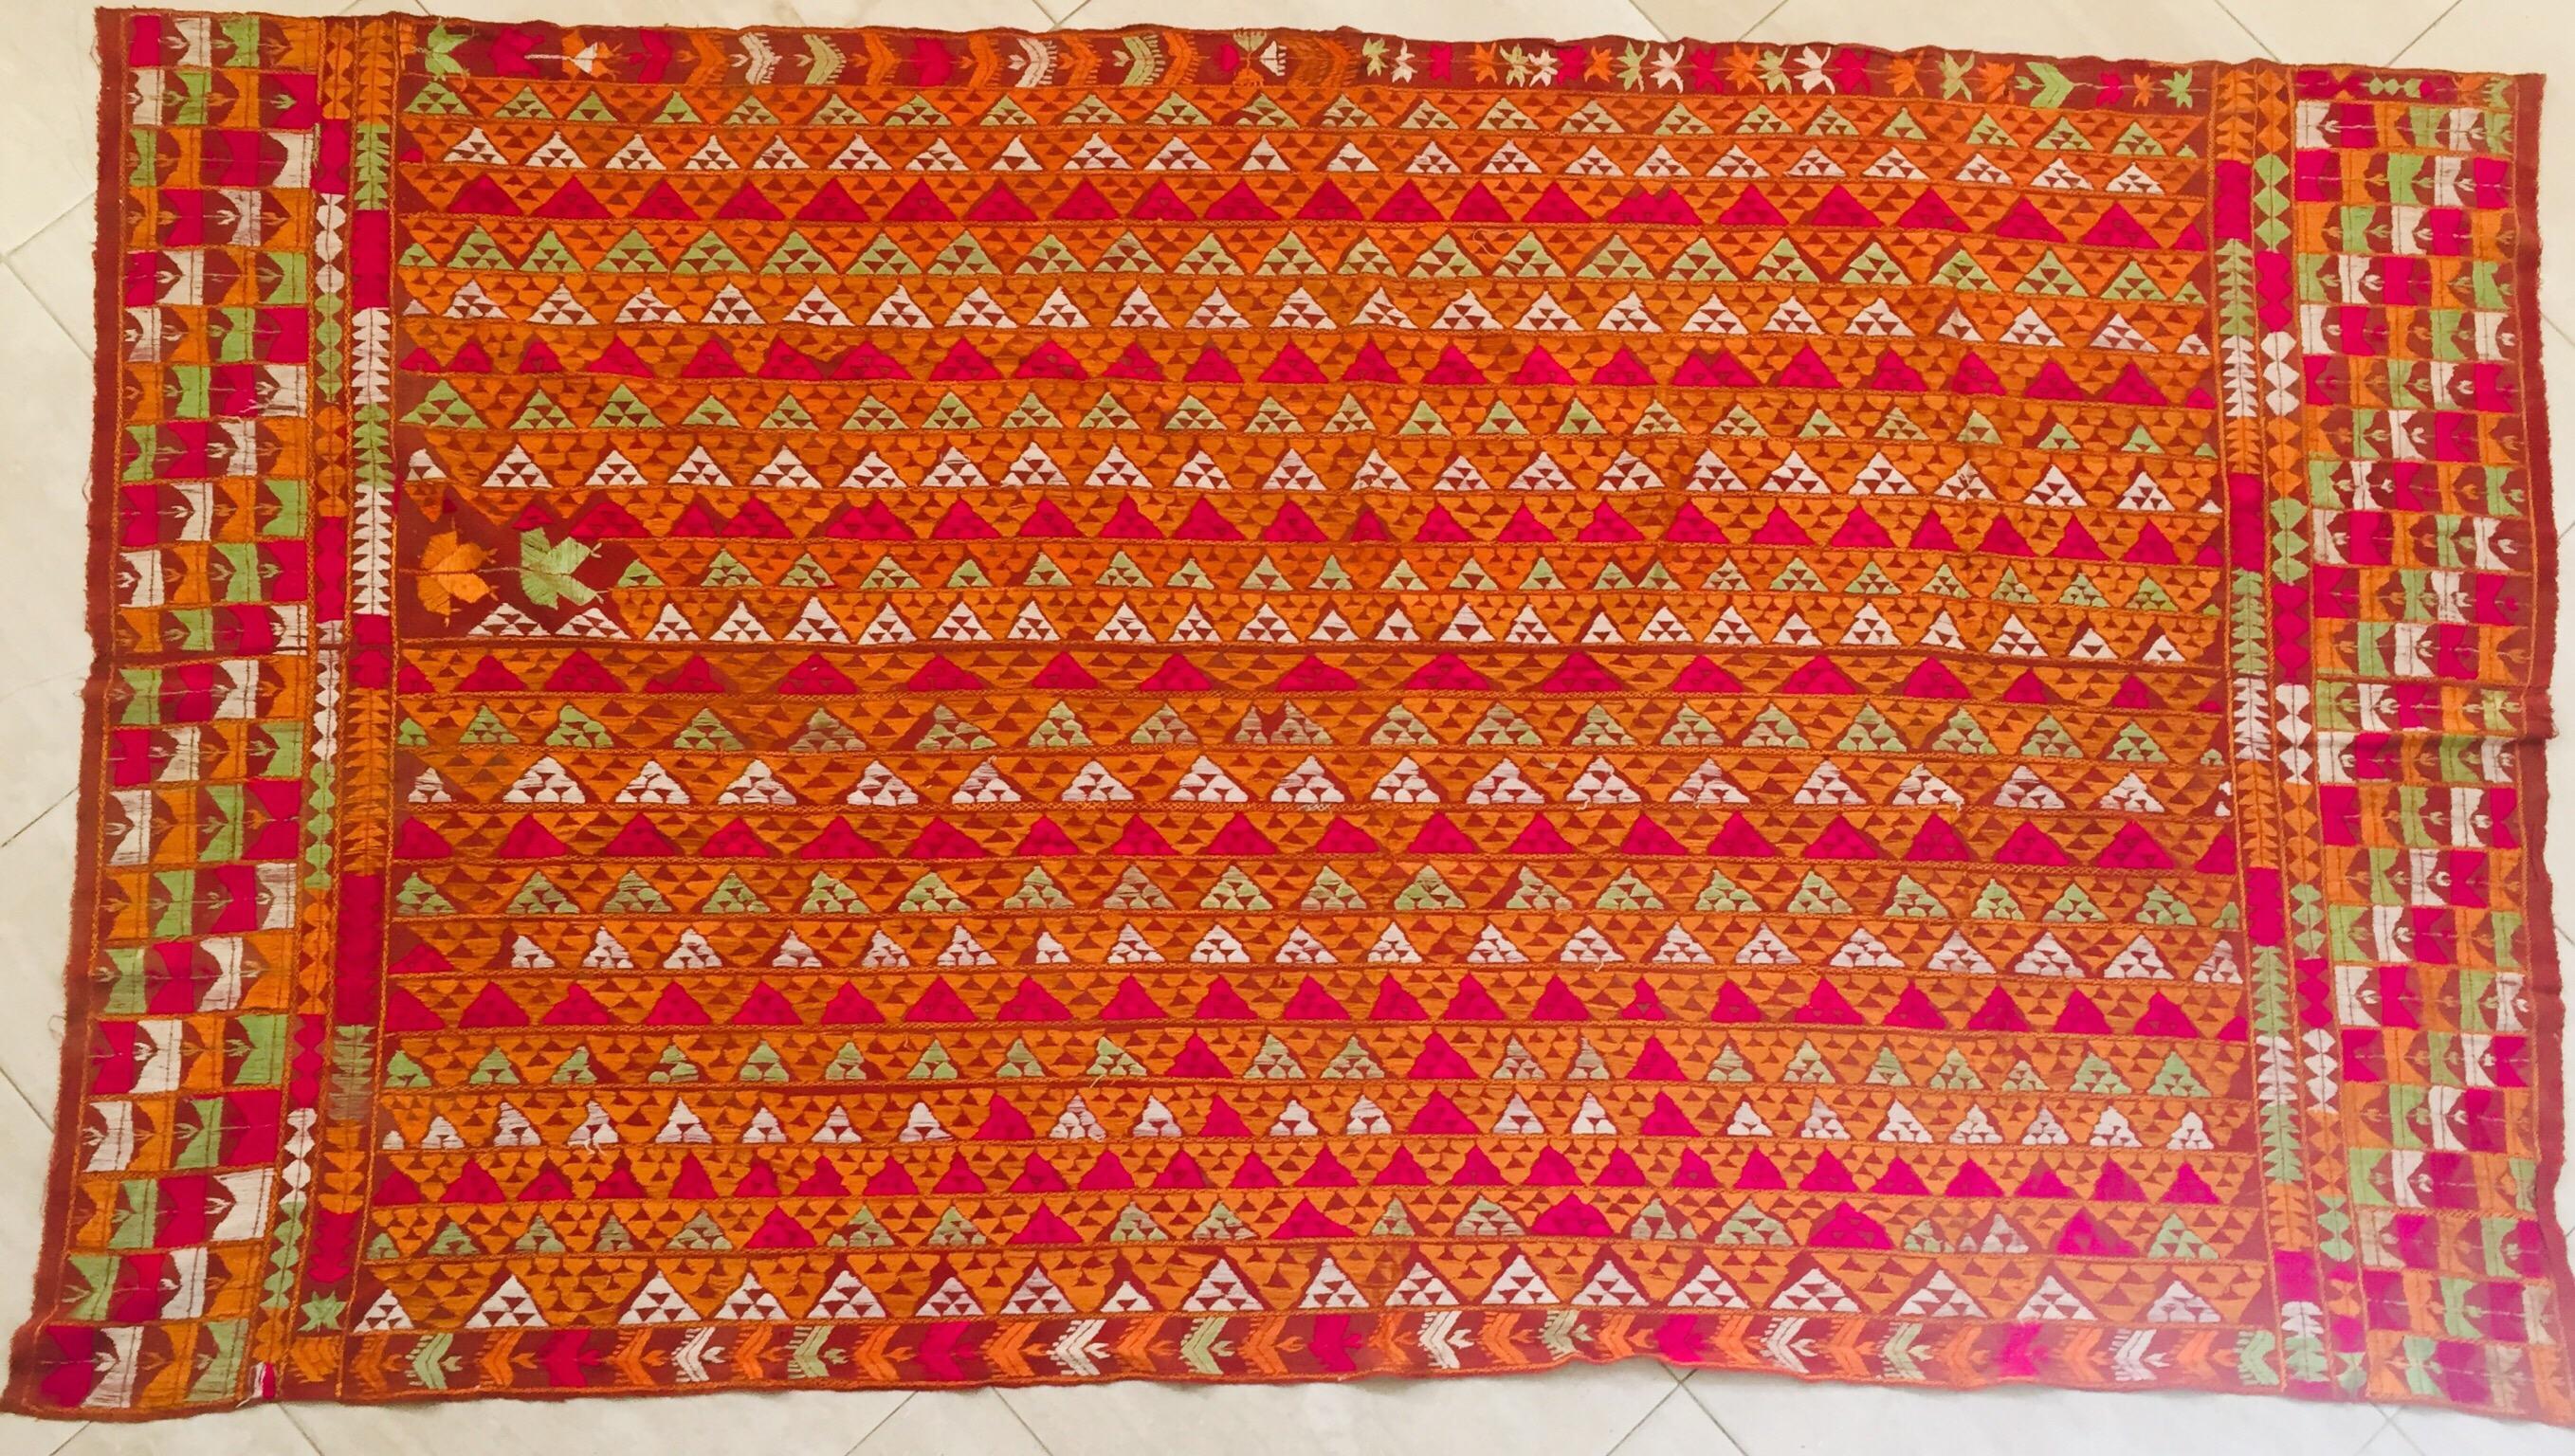 A rare pattern embroidered in silk on a hand loomed cotton background.
Punjab is known for its Phulkaris. The embroidery is done with floss silk thread on coarse handwoven cotton fabric. Geometrical patterns are usually embroidered on the Phulkaris.